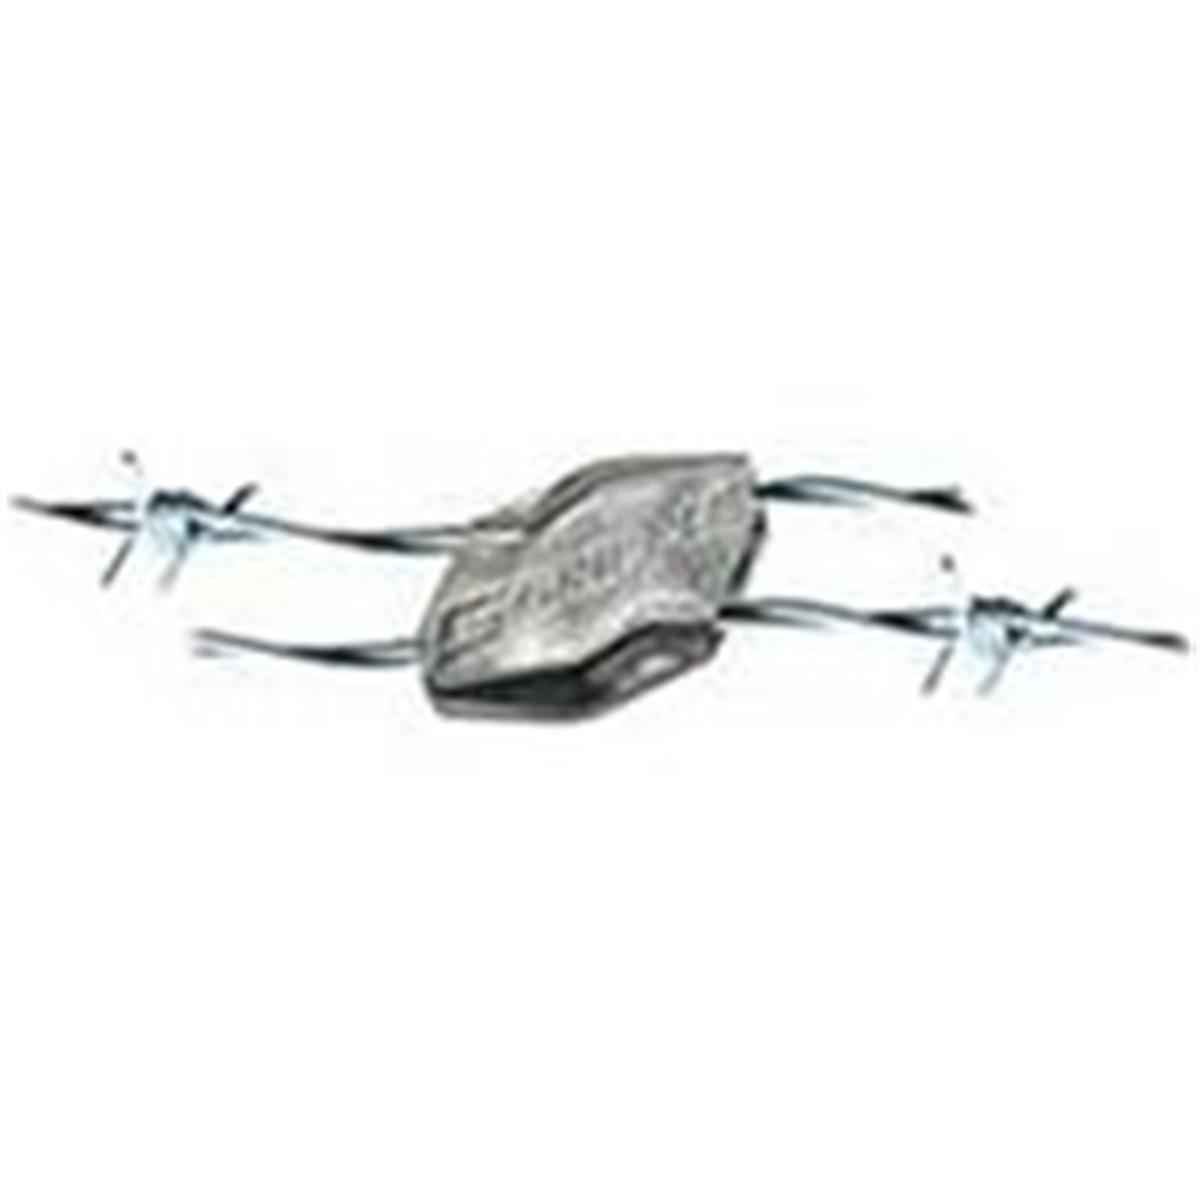 Picture of Bekaert 547068 Gripple Barbed Wire, Pack of 10